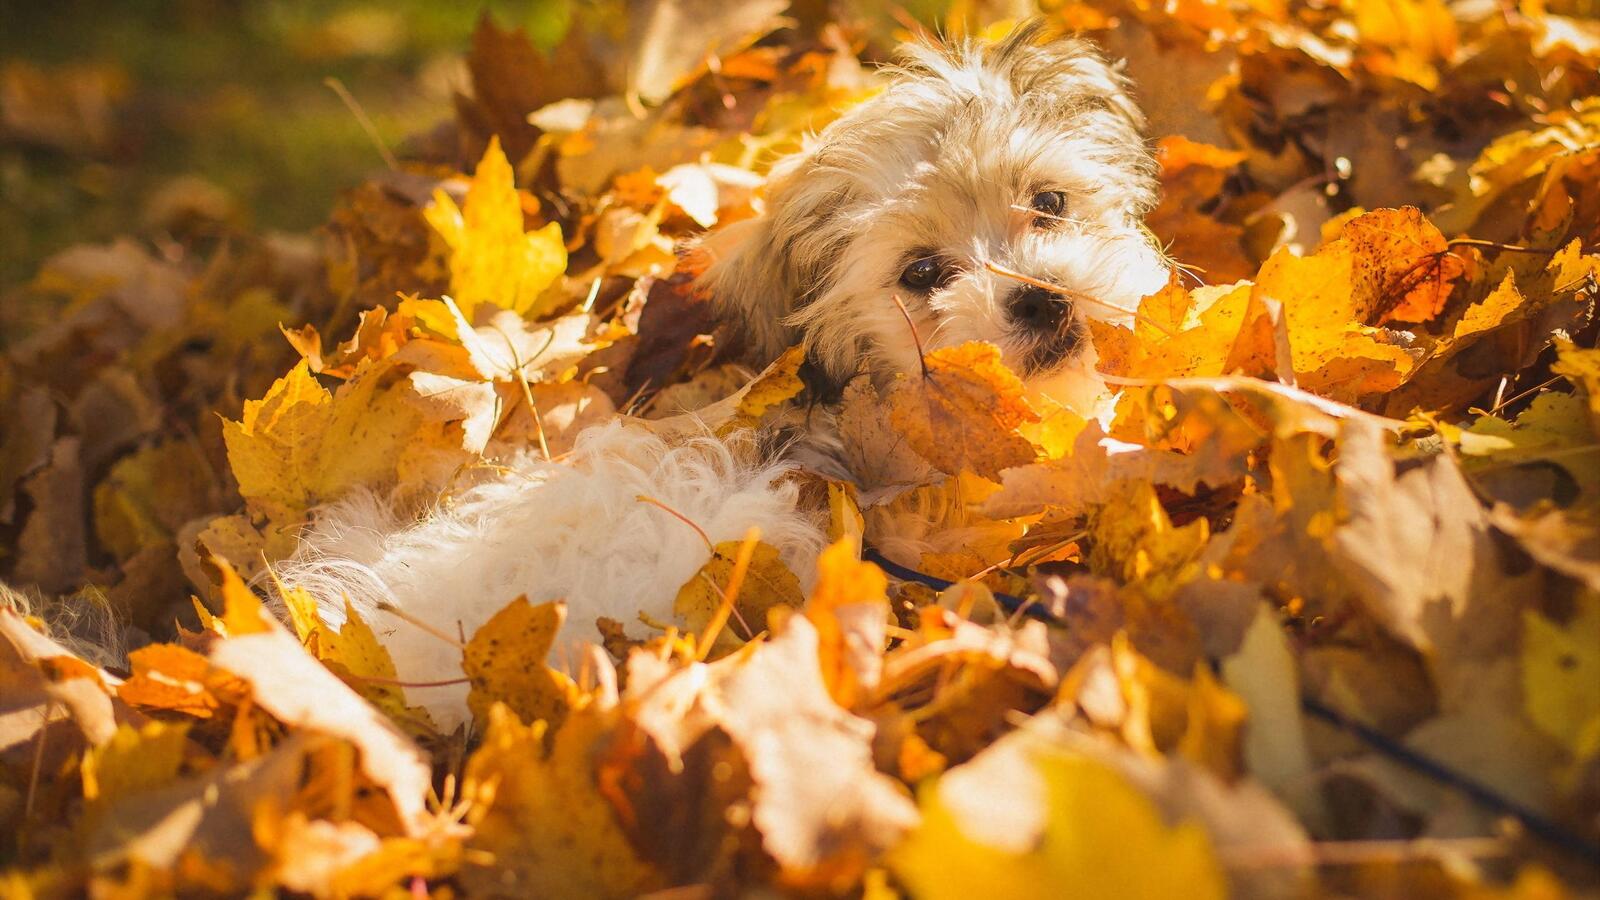 Wallpapers dog leaf fall maple leaves on the desktop